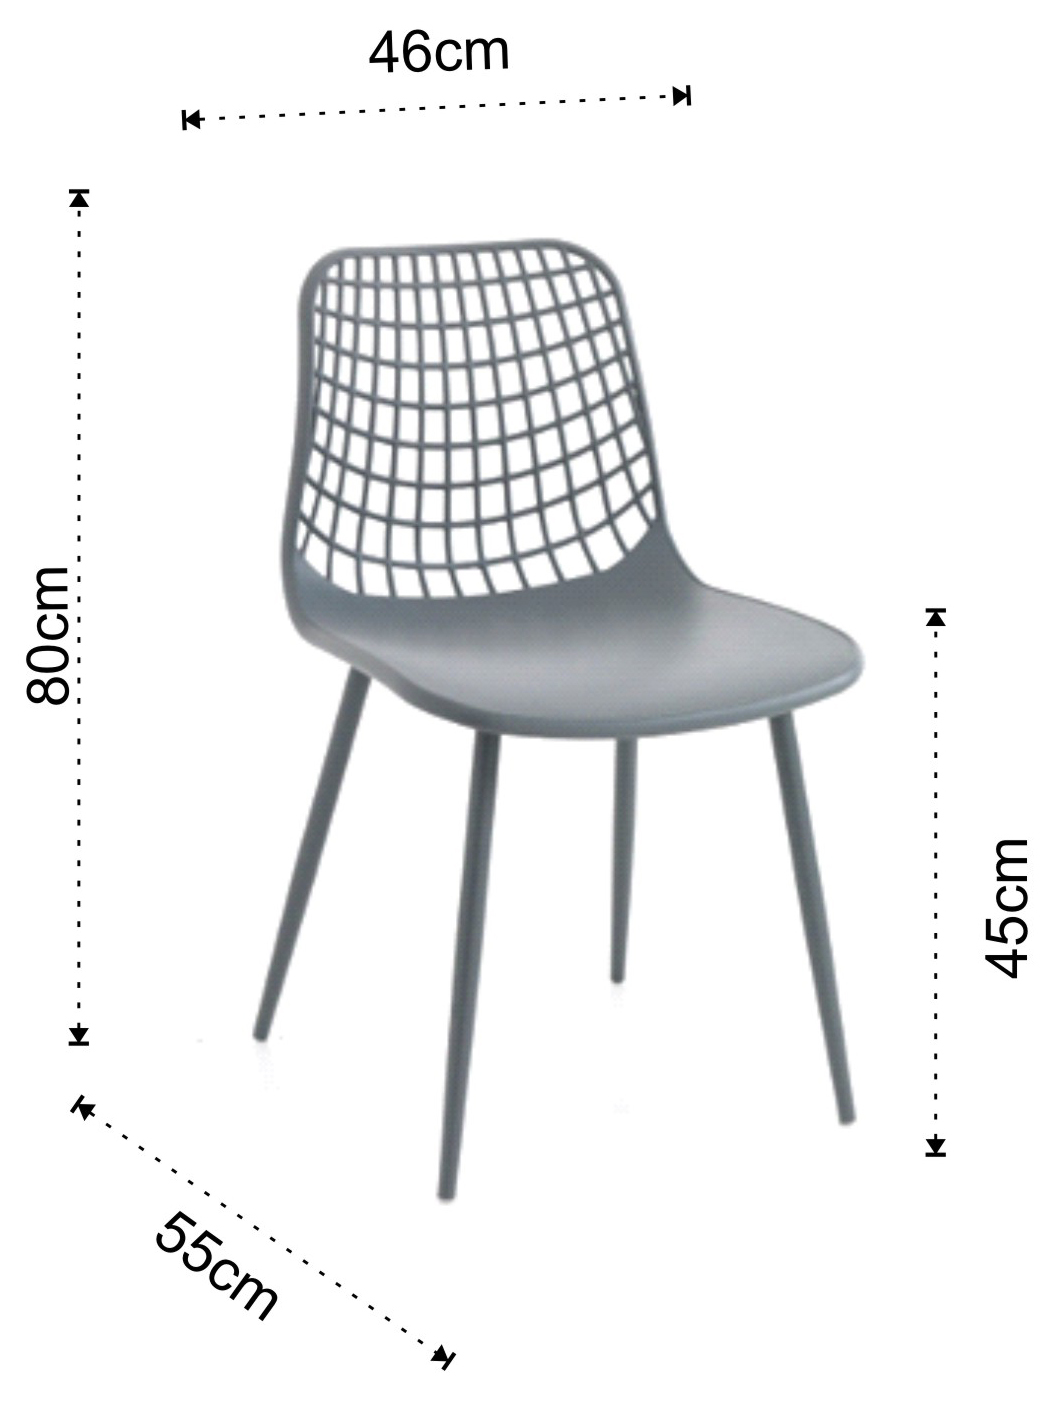 Dimensions of the Nairobi Chair by Tomasucci